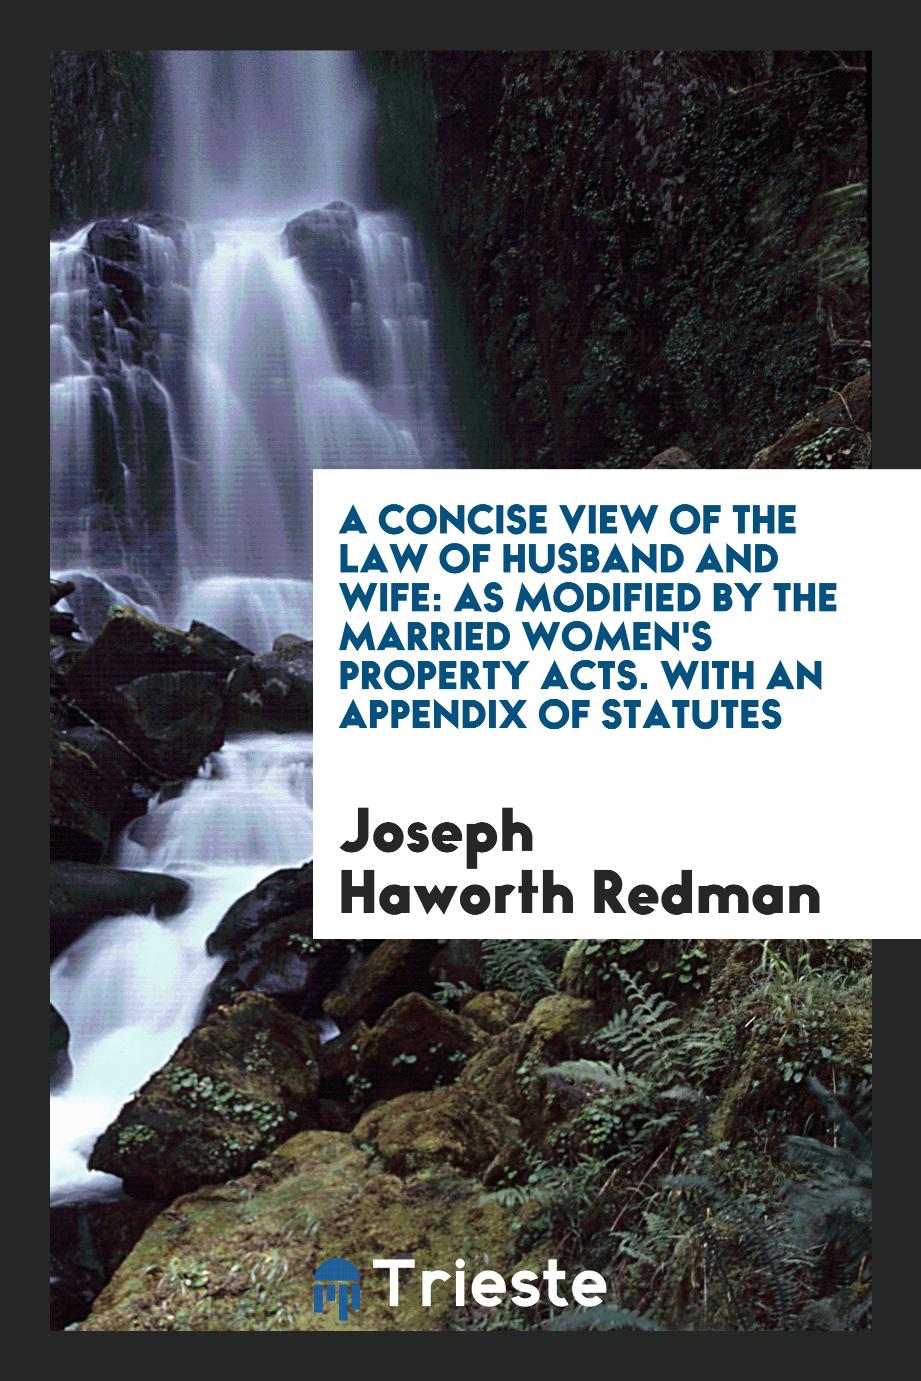 A Concise View of the Law of Husband and Wife: As Modified by the Married Women's Property Acts. With an Appendix of Statutes